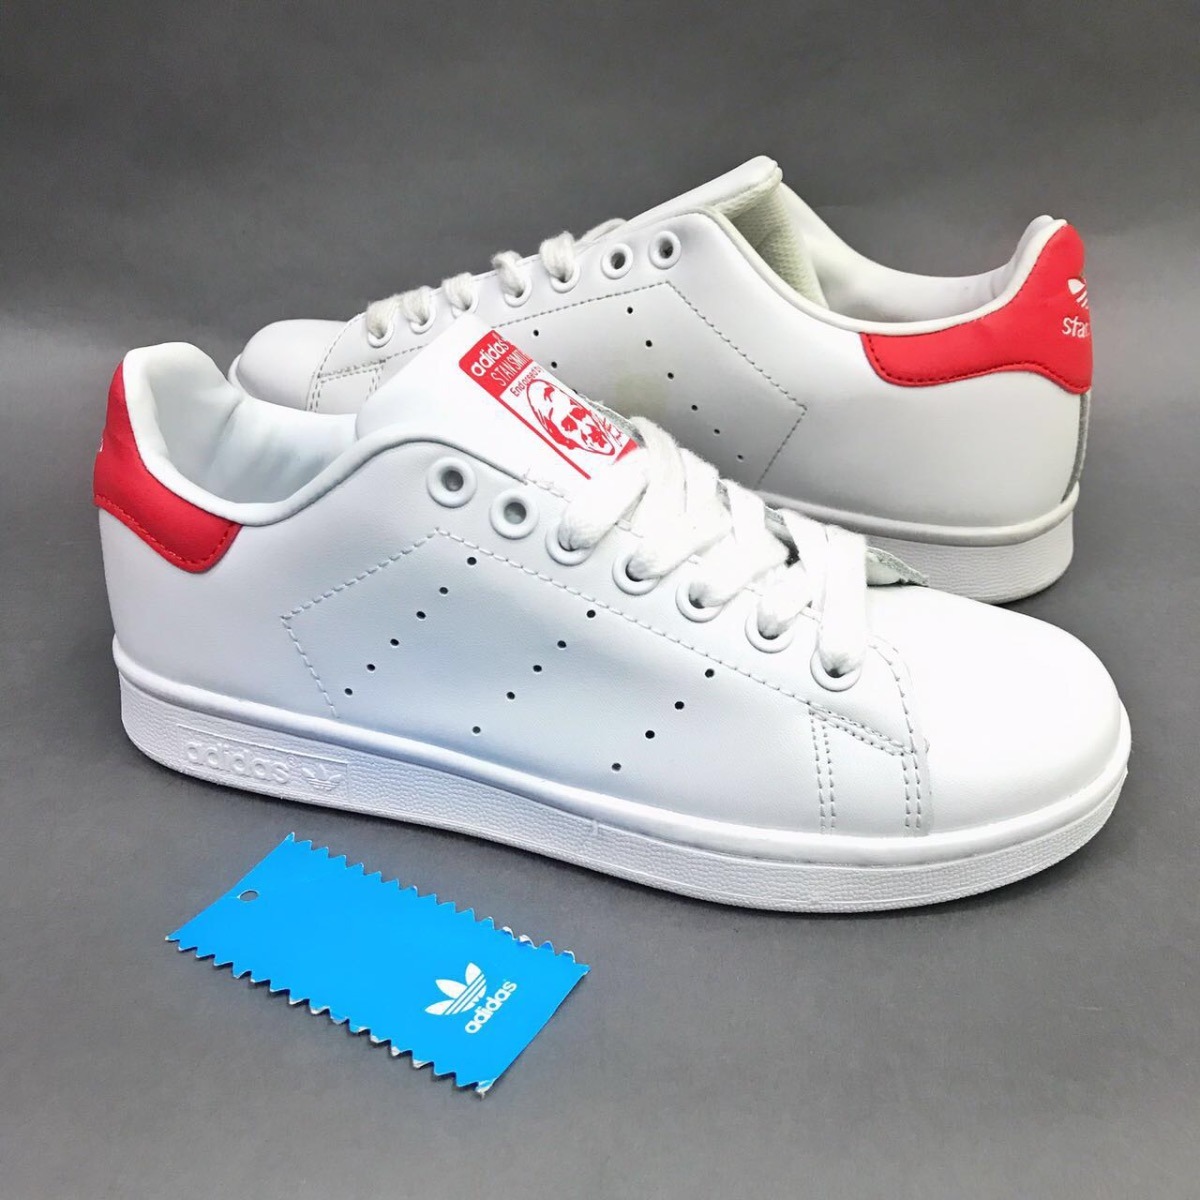 Stan Smith Rojas Mujer Outlet Sale, UP TO 52% OFF | lavalldelord.com جوسيه